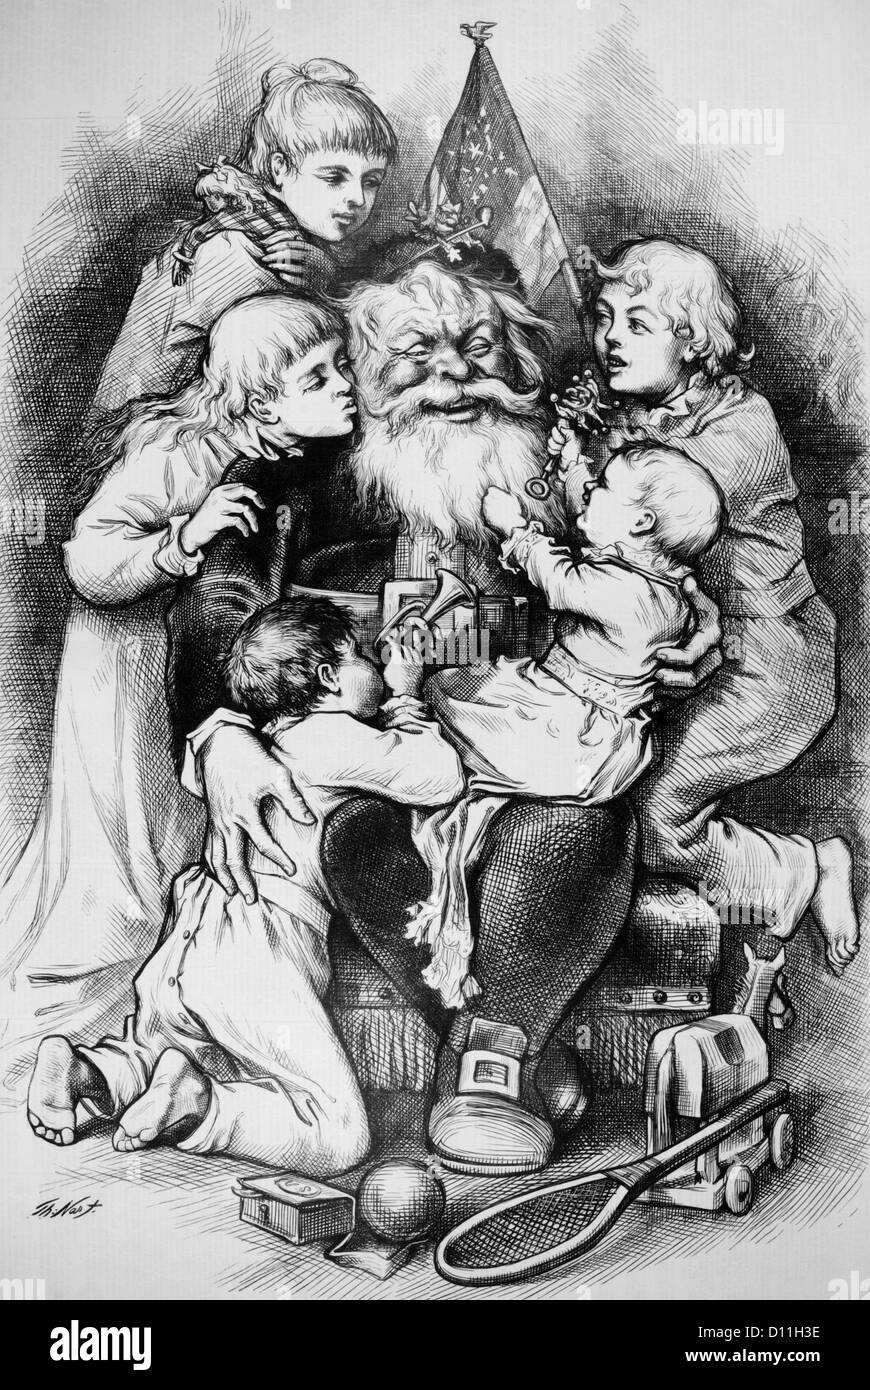 1870s 1879 THOMAS NAST ILLUSTRATION MERRY CHRISTMAS SANTA CLAUS SURROUNDED BY FIVE CHILDREN WITH CHRISTMAS GIFTS TOYS Stock Photo